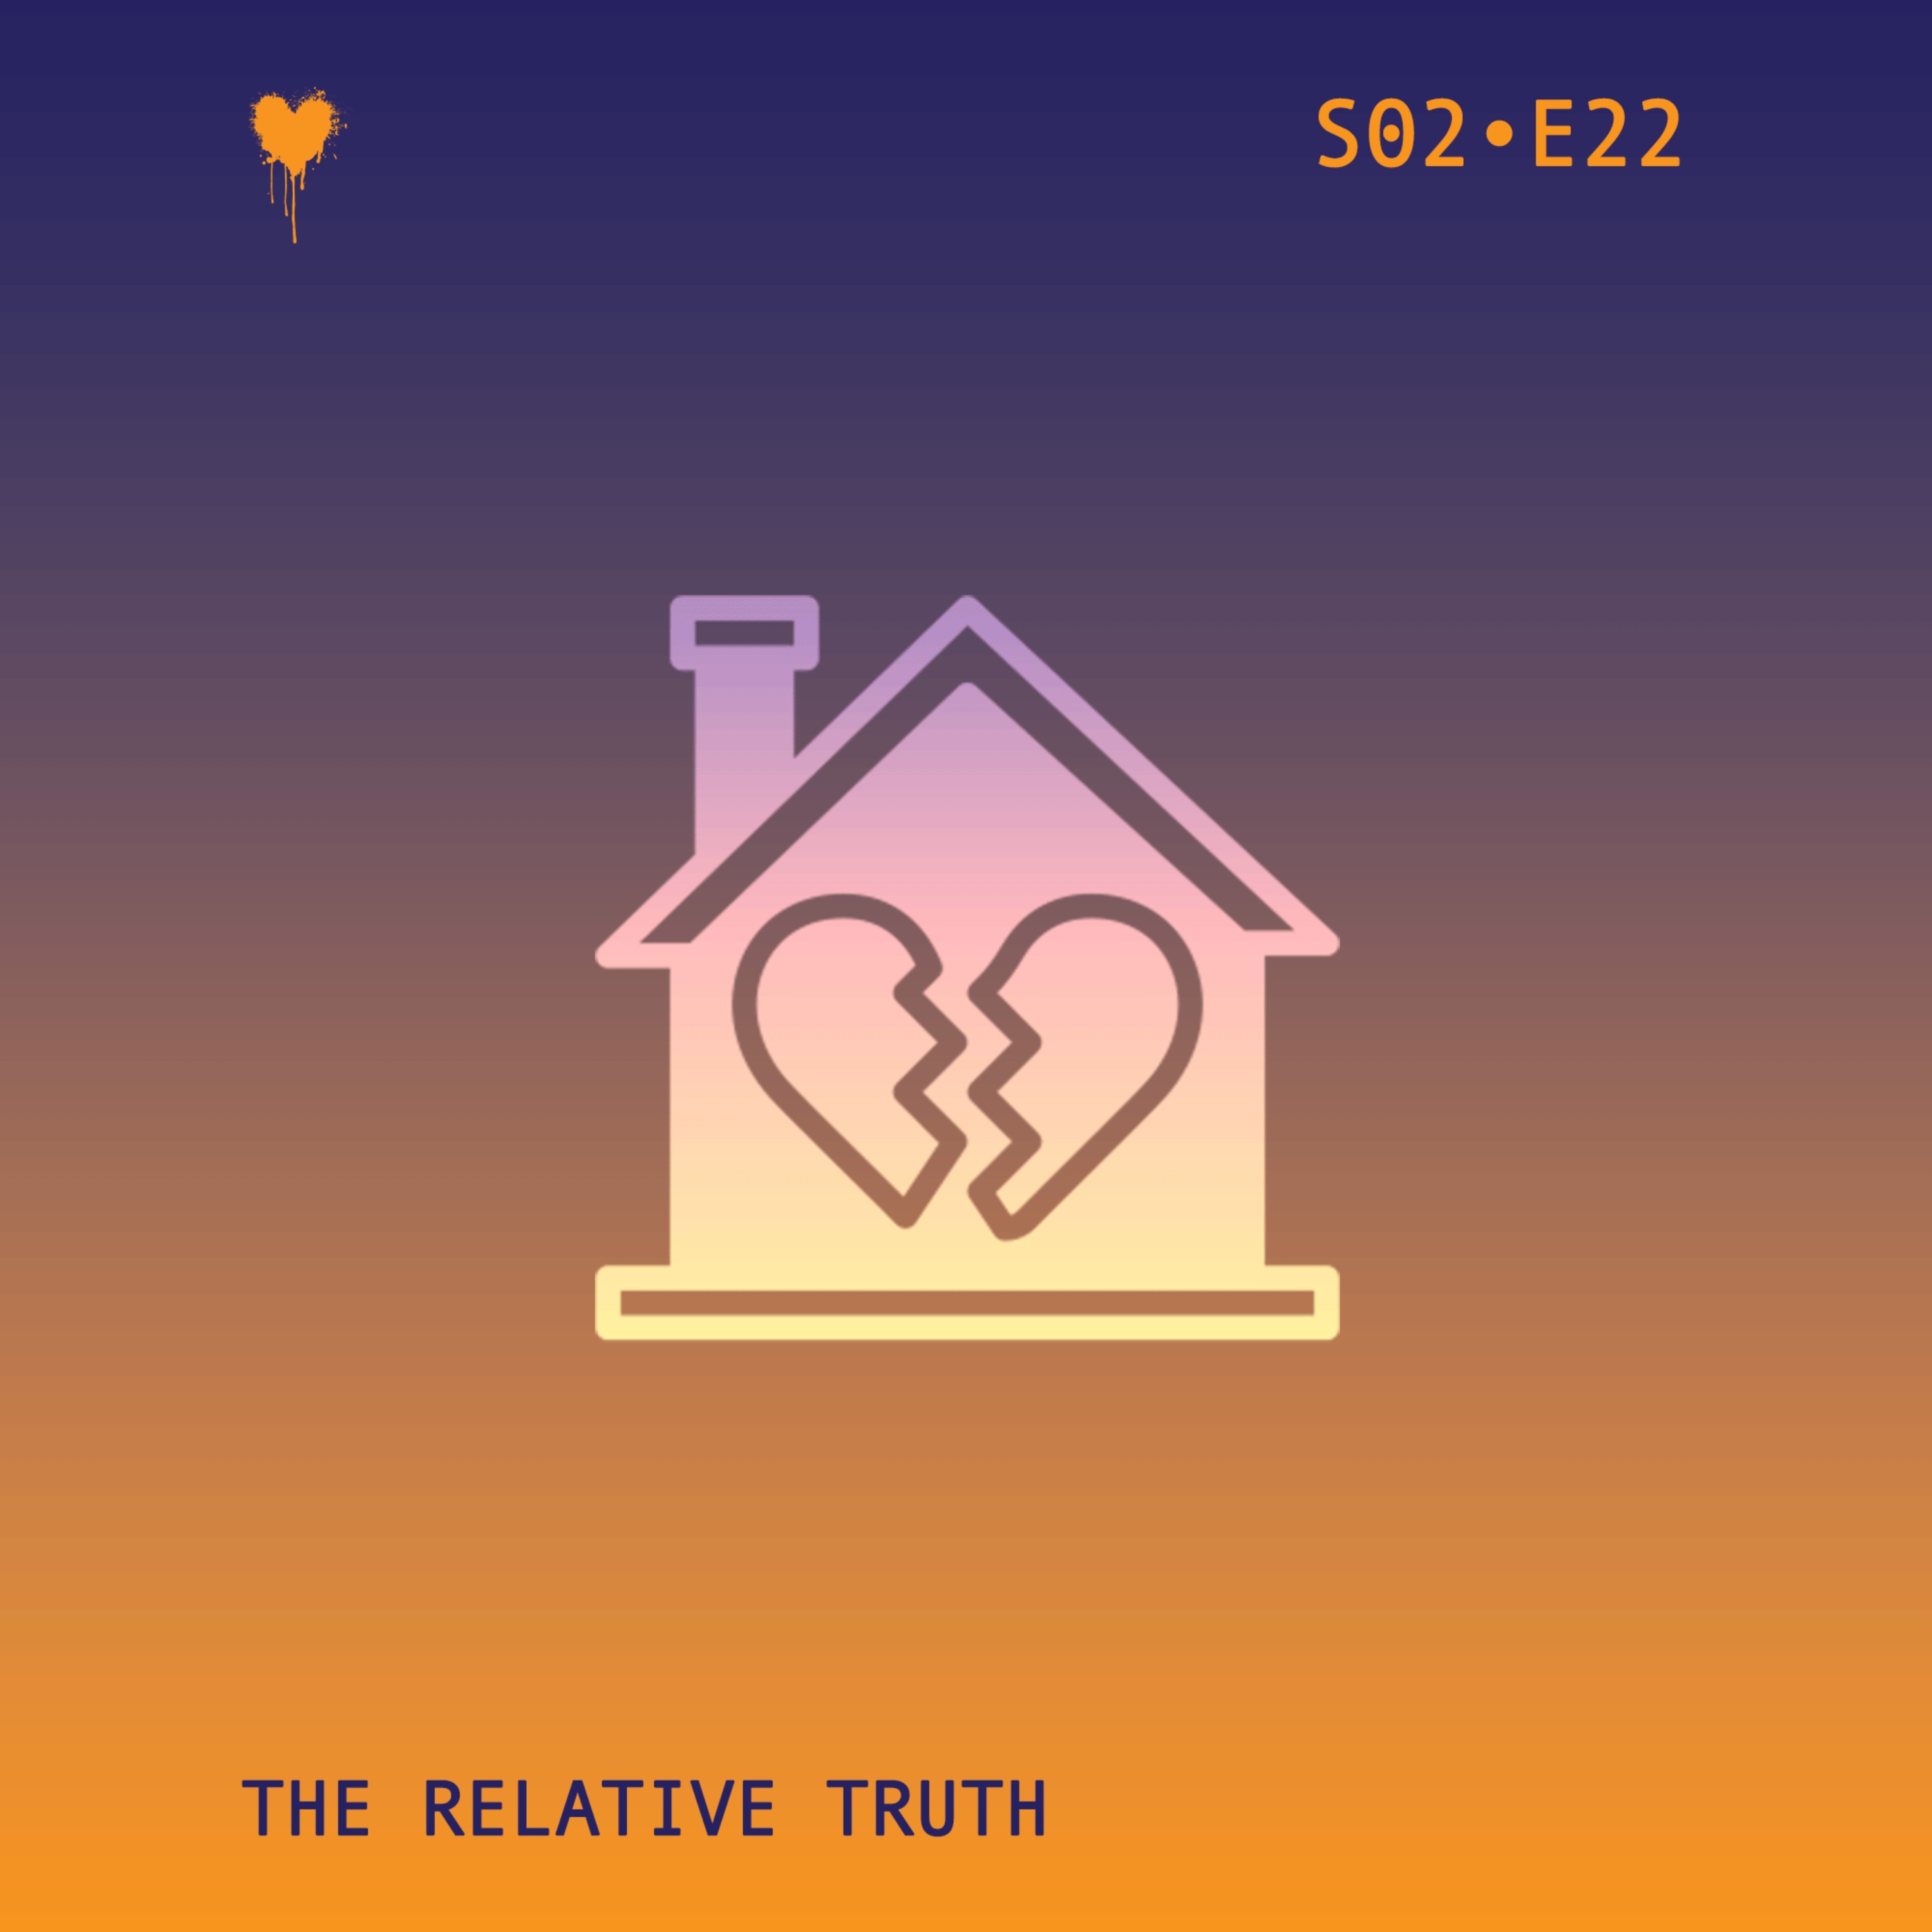 UPDATED: The Relative Truth